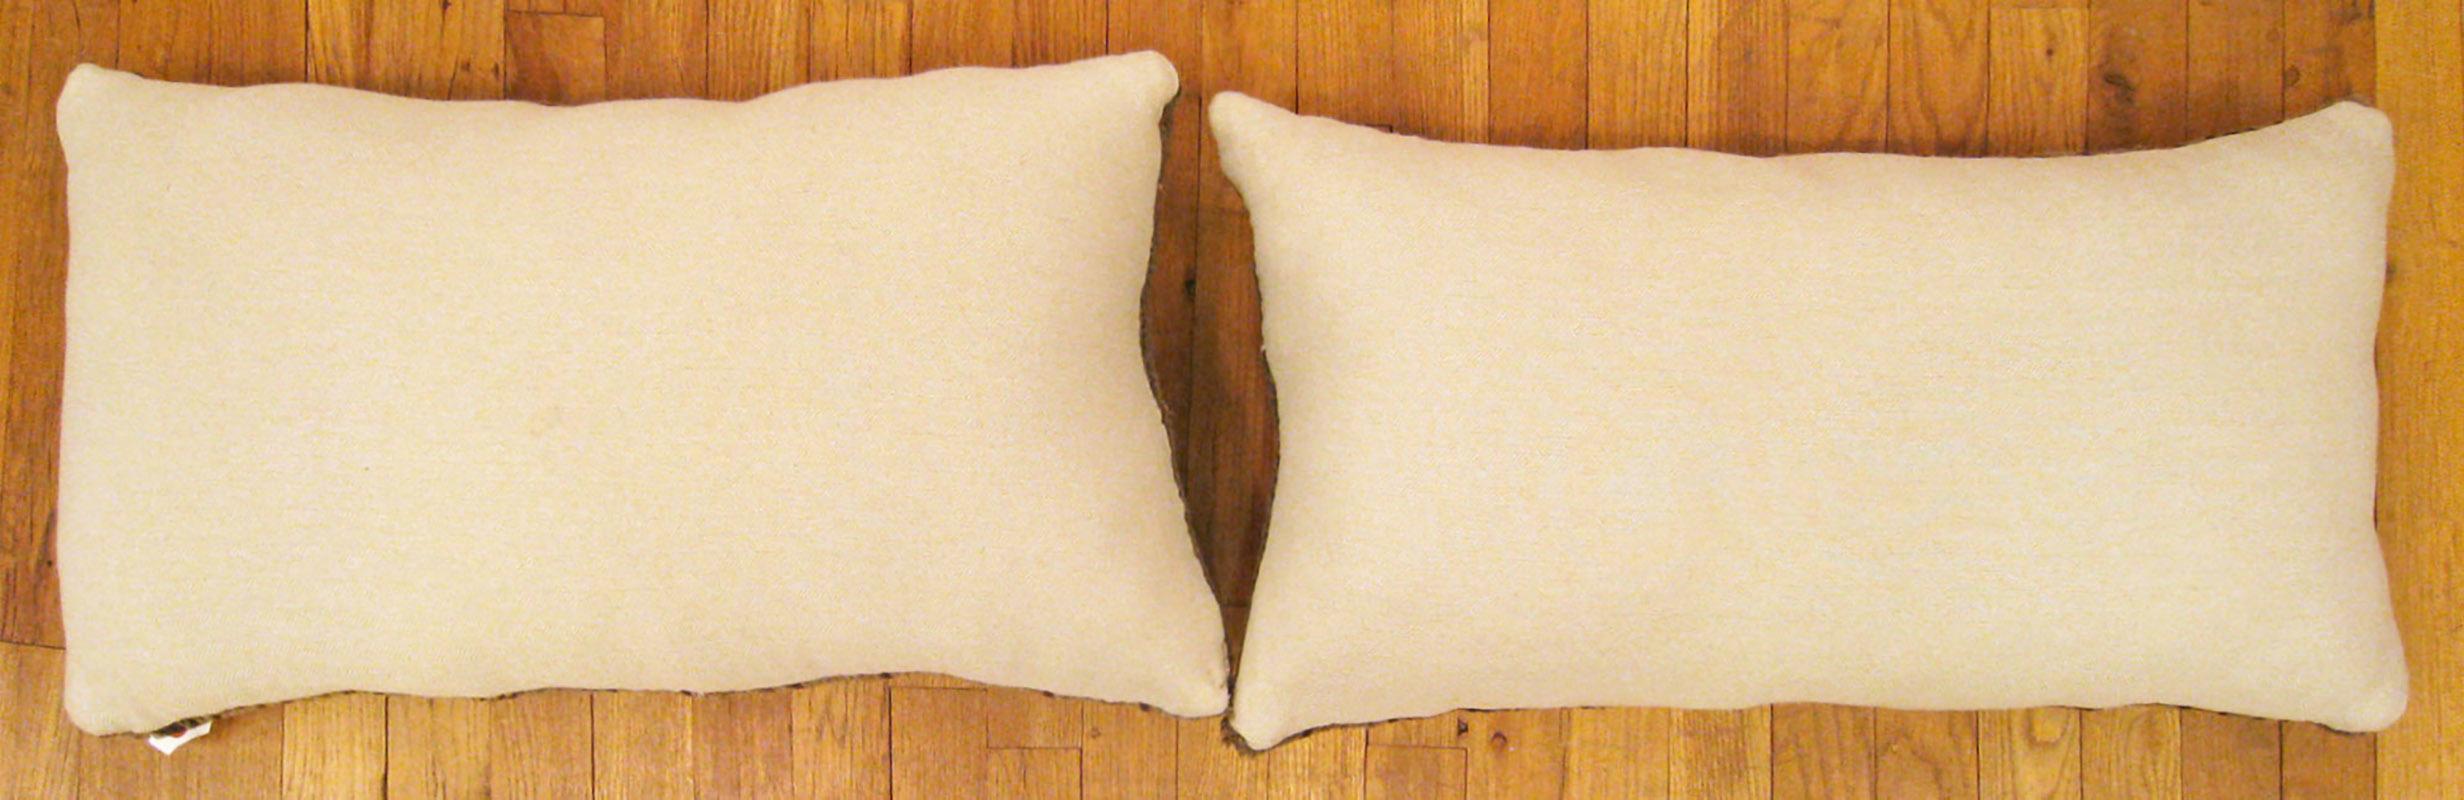 Pair of Decorative Antique Spanish Savonnerie Carpet Pillows with Geometric In Good Condition For Sale In New York, NY